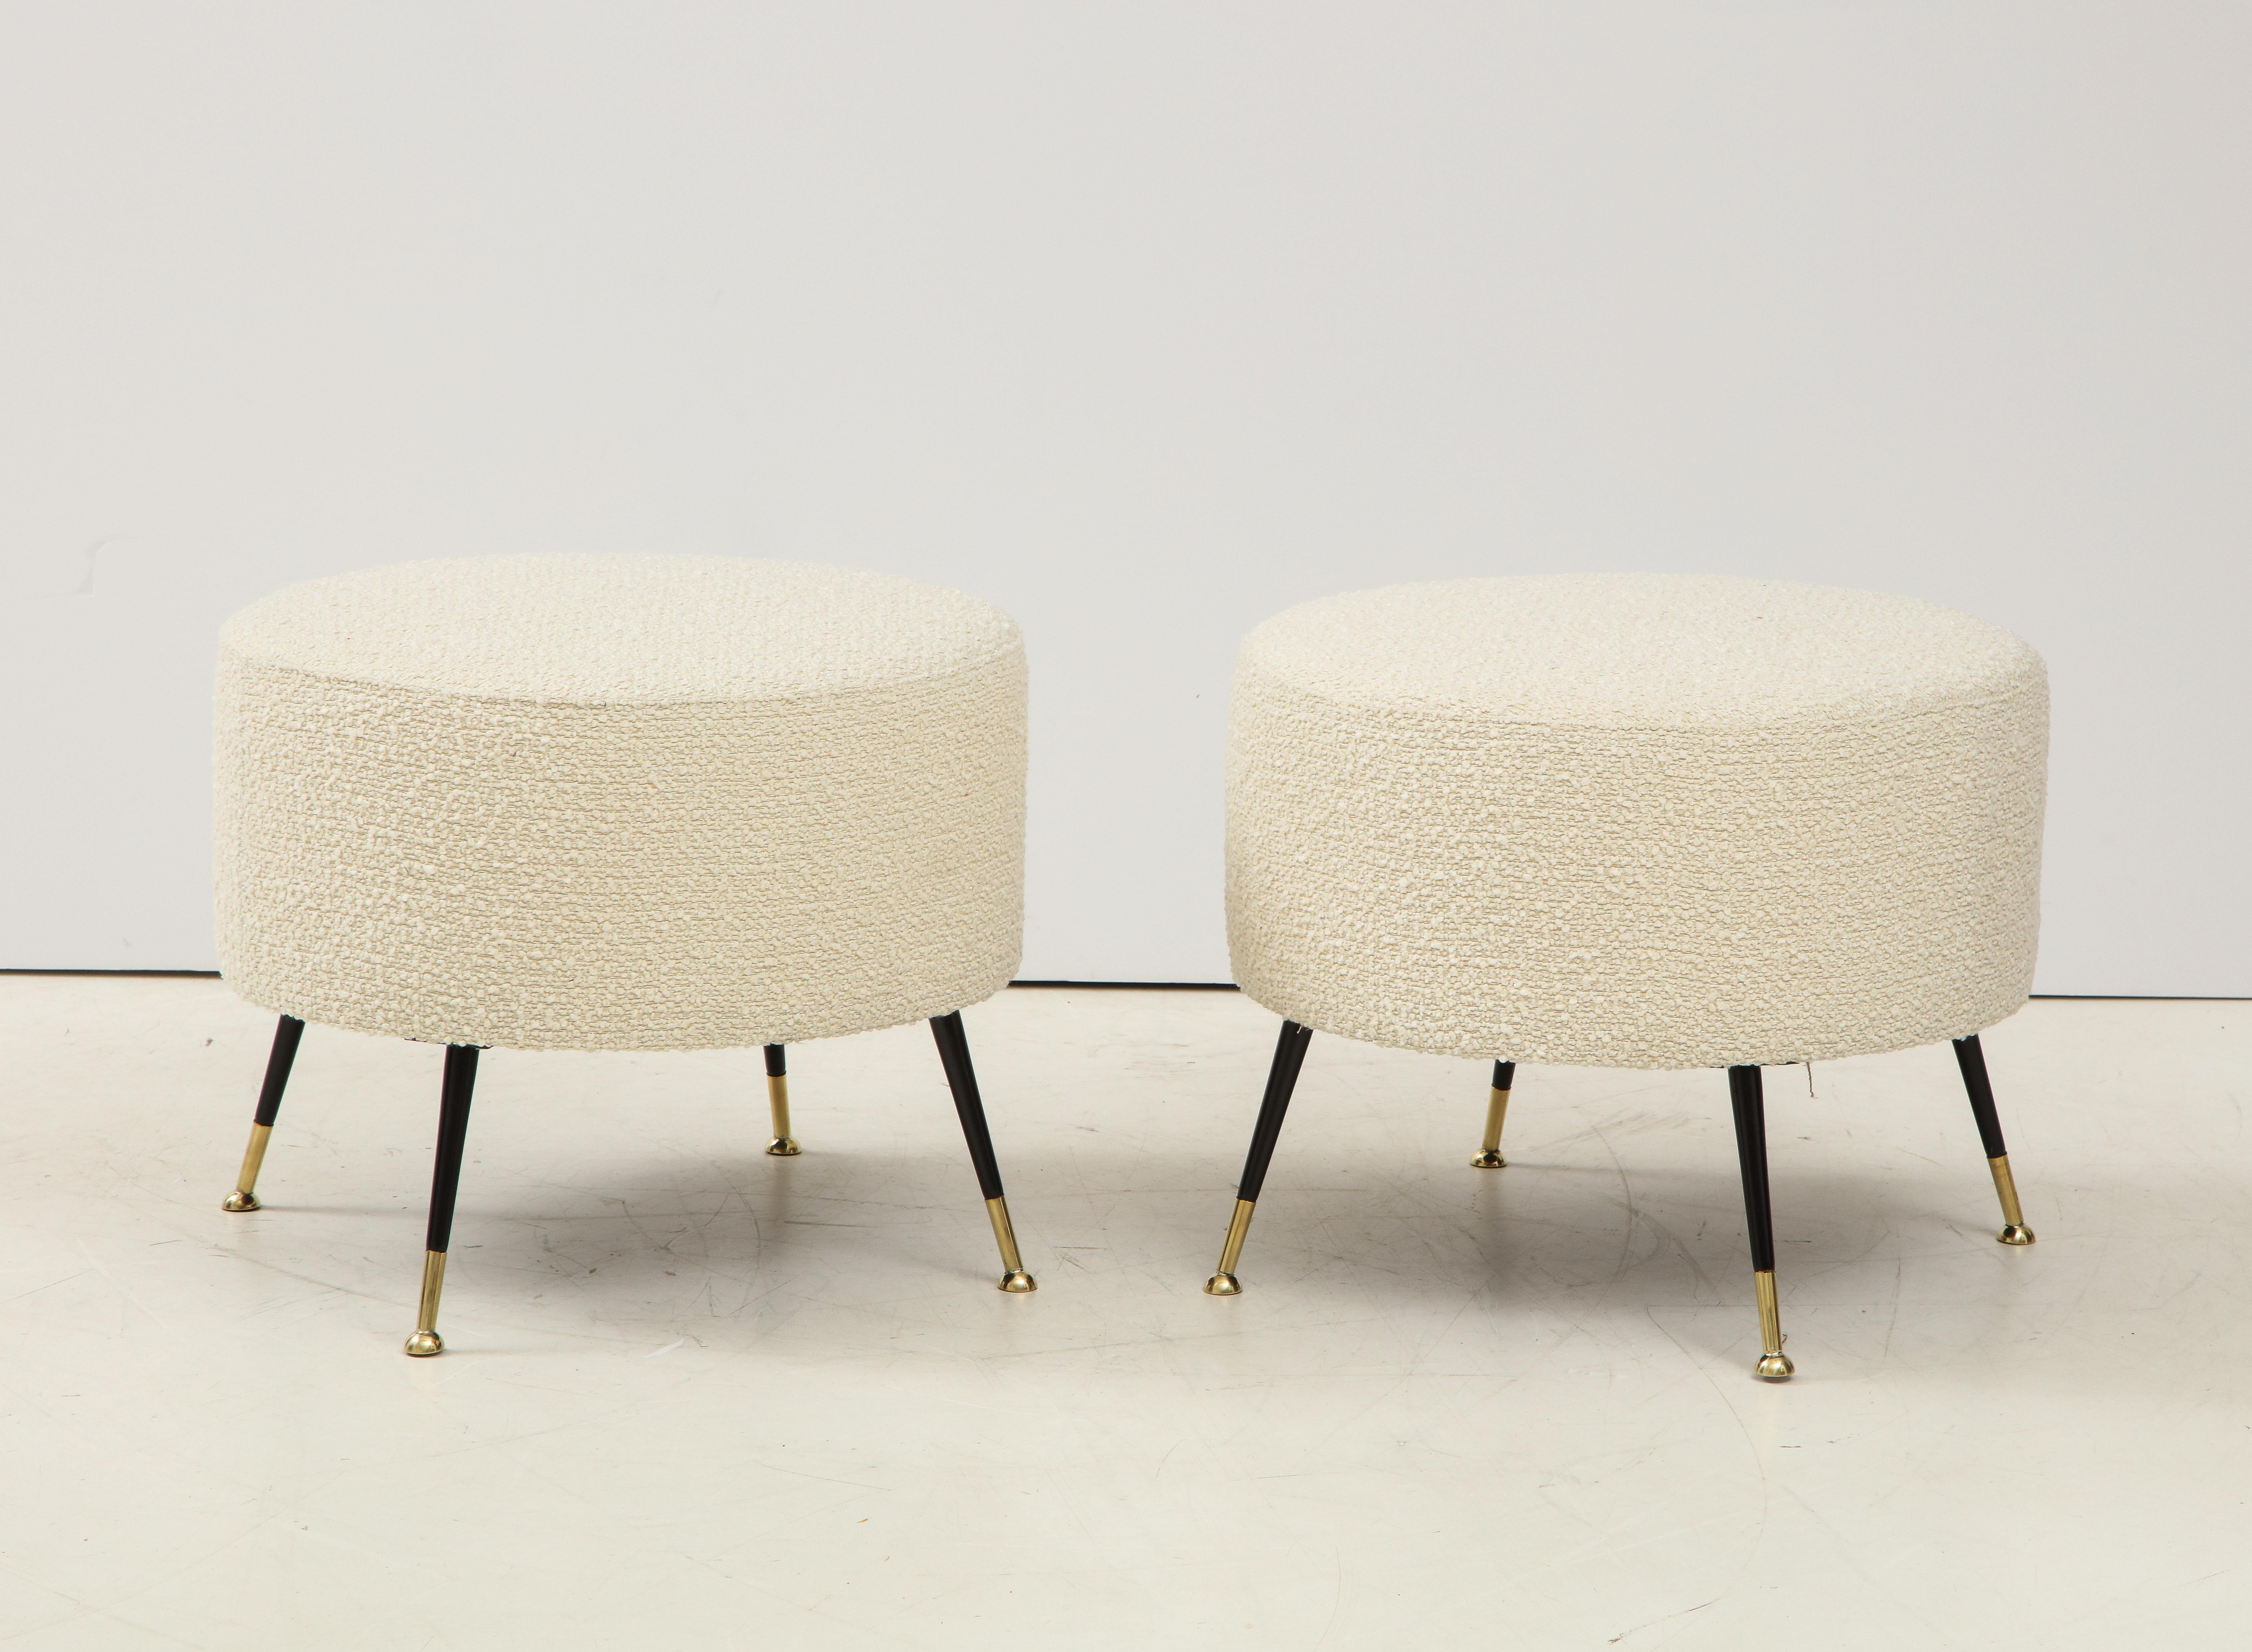 Hand-Crafted Pair of Round Stools or Poufs in Ivory Boucle Brass Legs, Italy, 2021